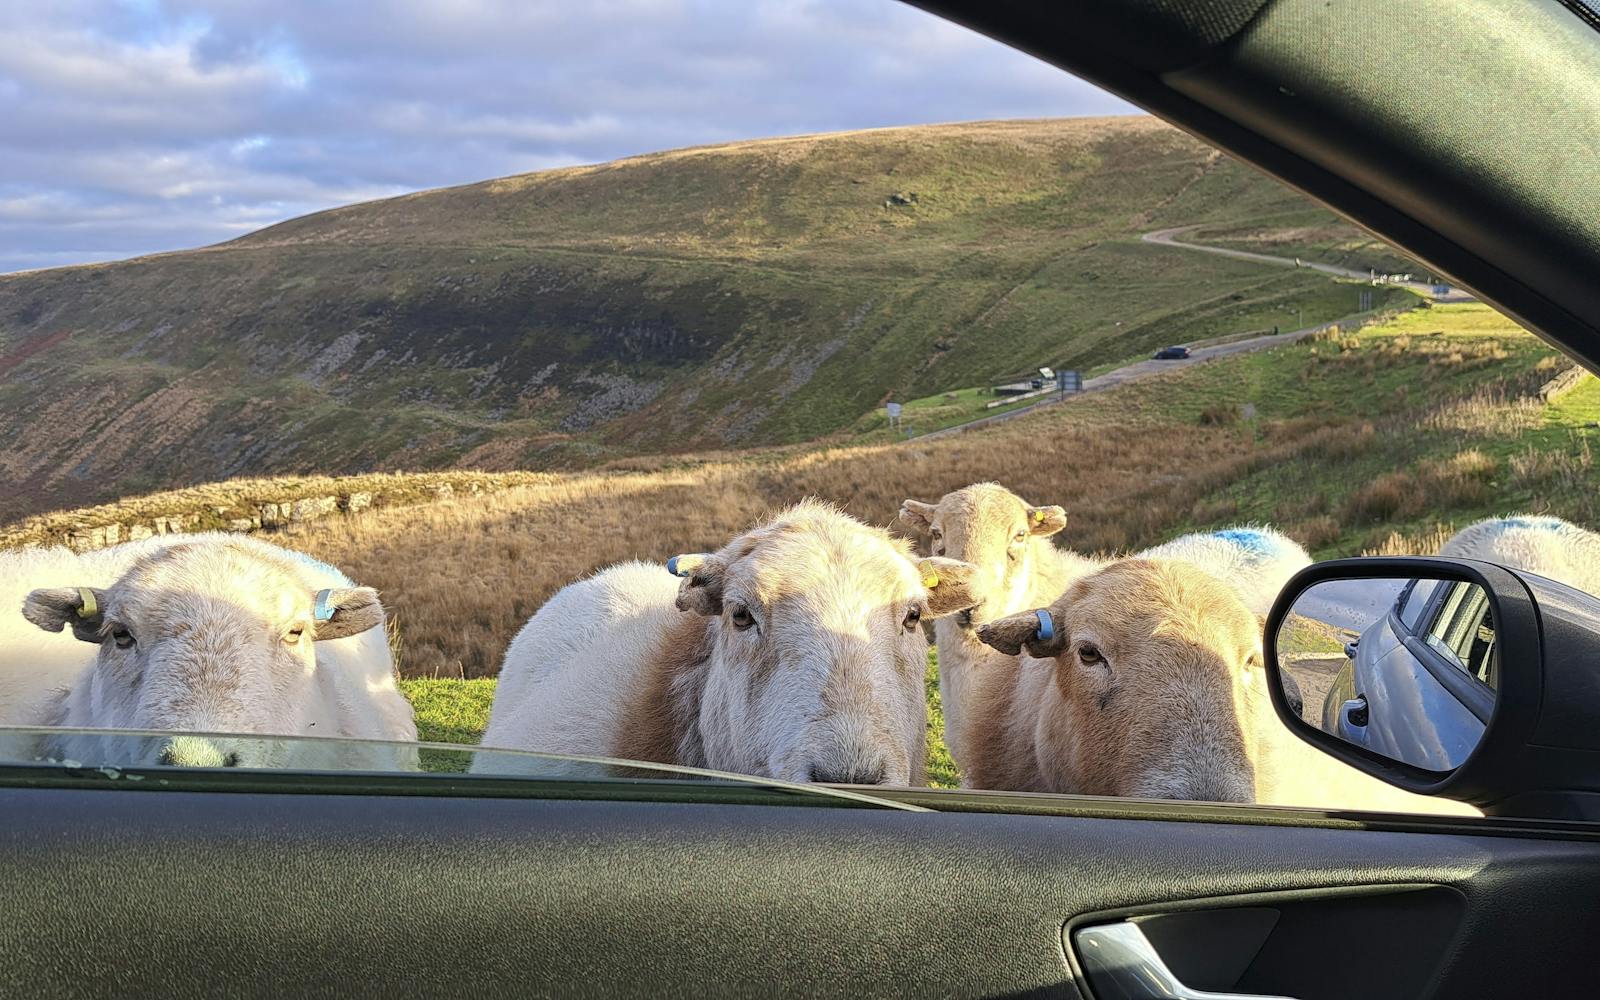 A herd of sheep of various colors and sizes grazing on a grassy hillside next to a parked car